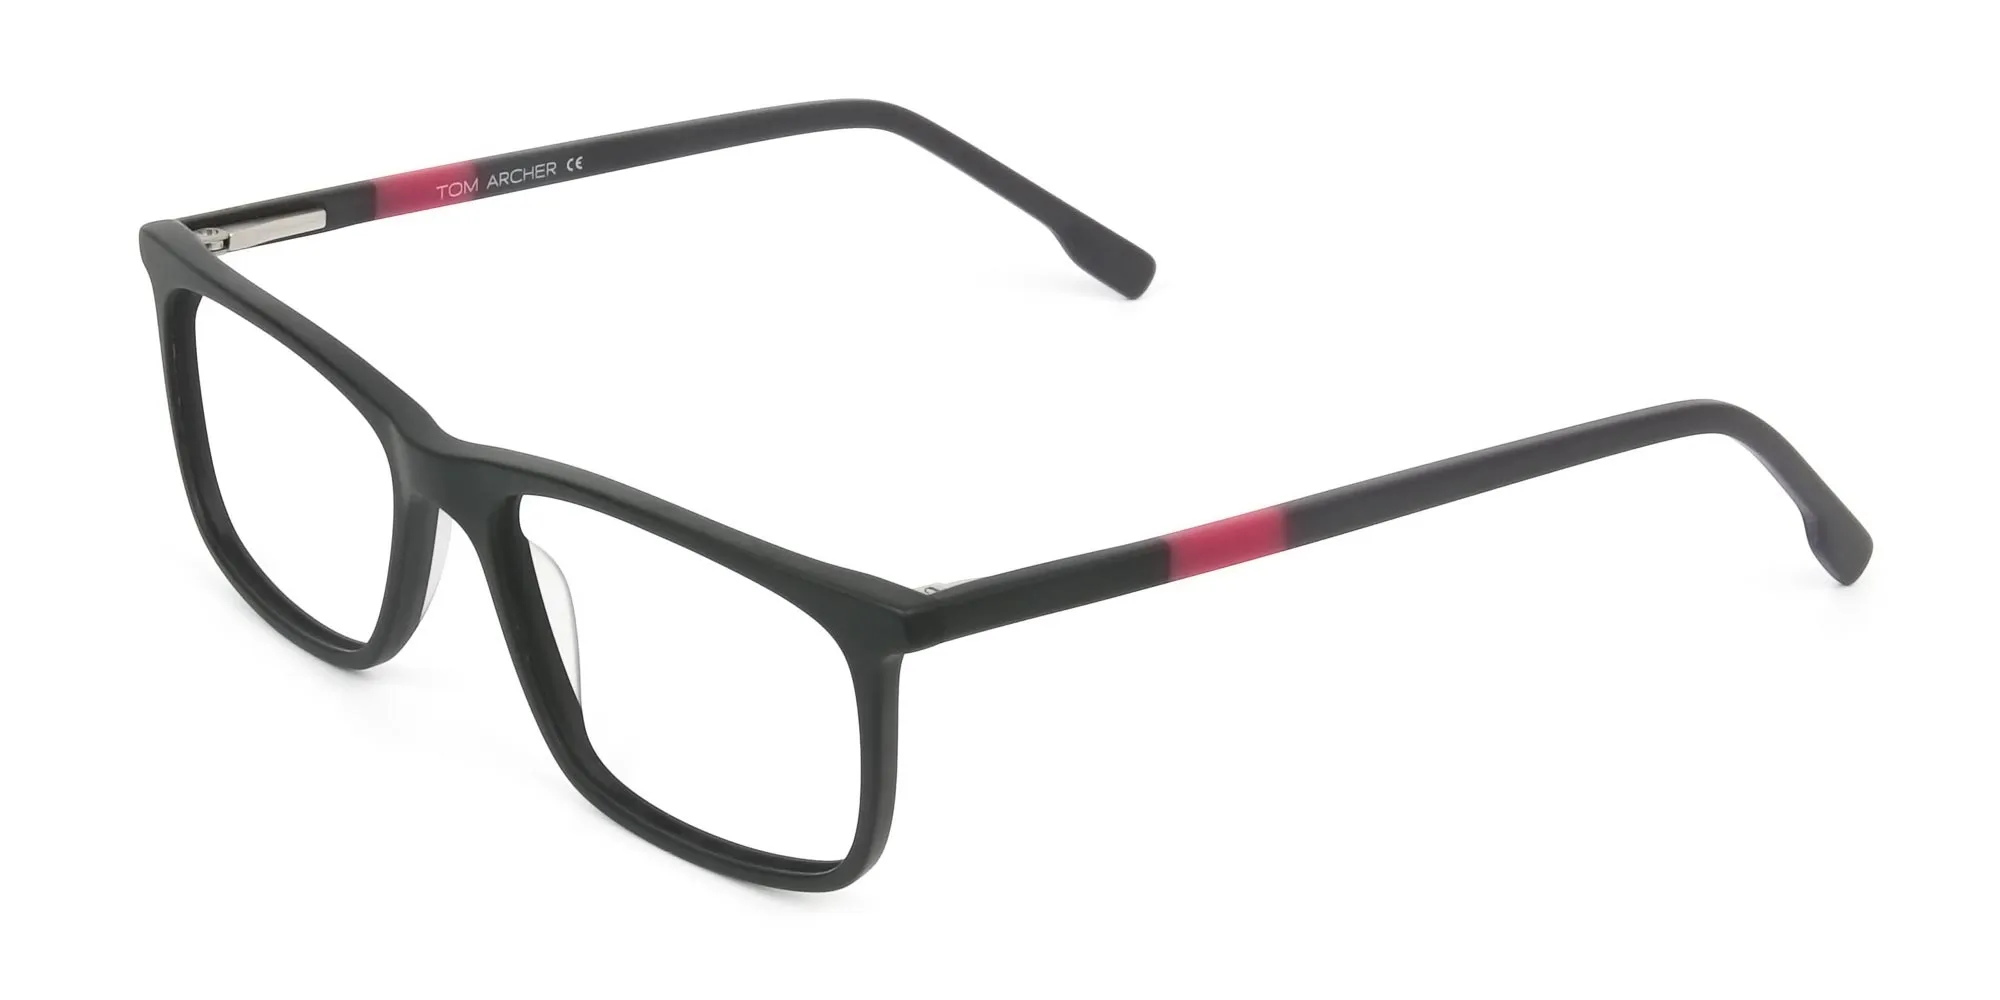 Matte Black & Red Acetate Spectacles - 2